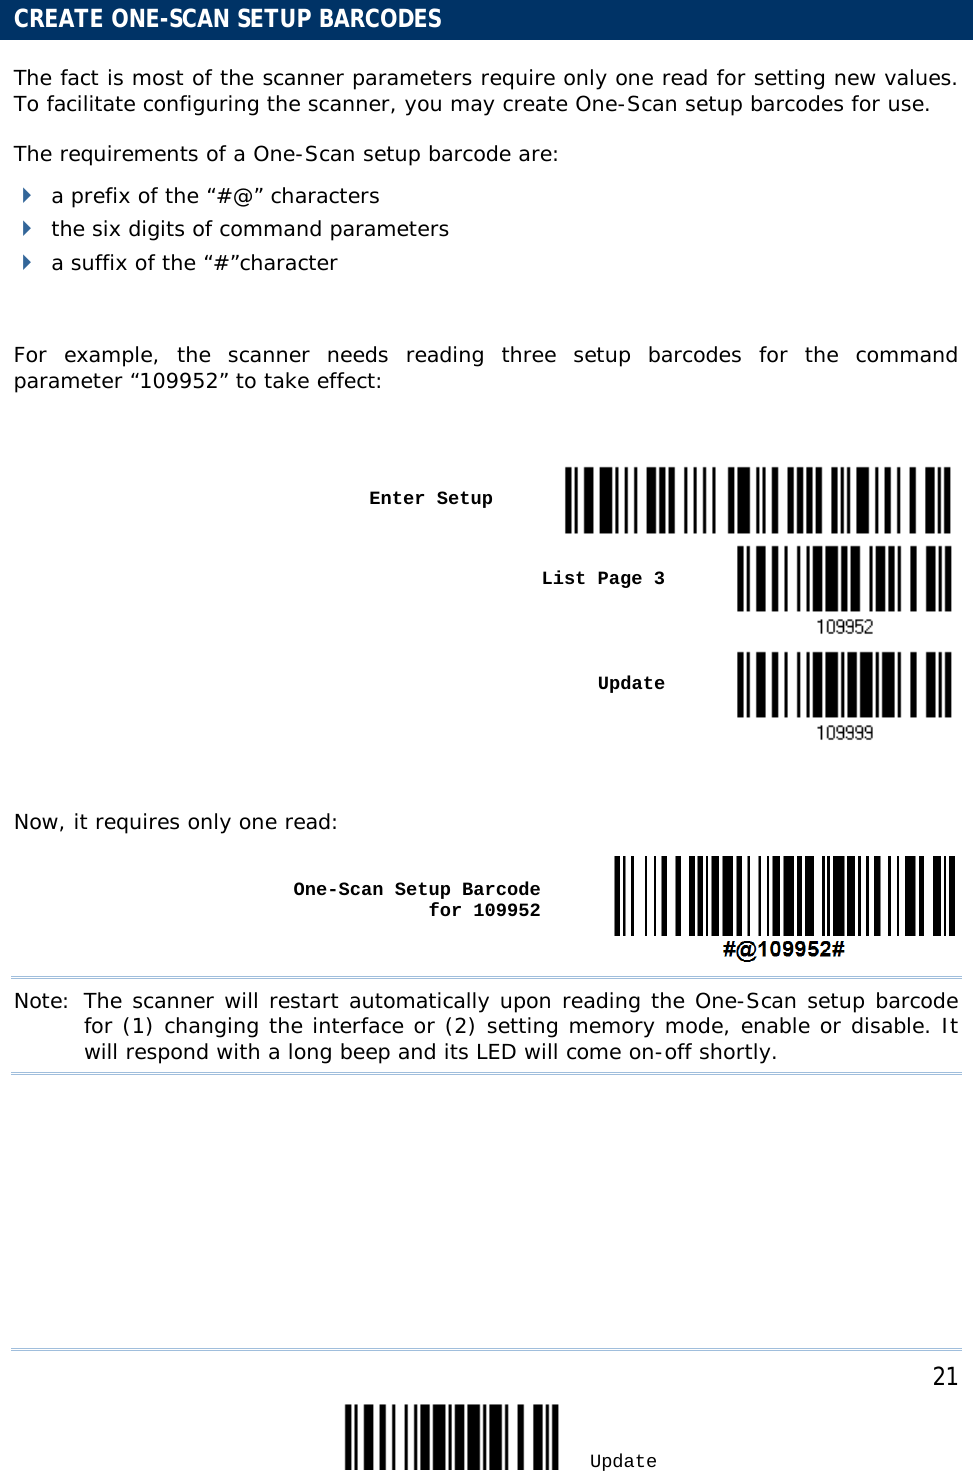     21 Update     CREATE ONE-SCAN SETUP BARCODES The fact is most of the scanner parameters require only one read for setting new values. To facilitate configuring the scanner, you may create One-Scan setup barcodes for use.  The requirements of a One-Scan setup barcode are:   a prefix of the “#@” characters  the six digits of command parameters  a suffix of the “#”character  For example, the scanner needs reading three setup barcodes for the command parameter “109952” to take effect:      Enter Setup     List Page 3       Update   Now, it requires only one read:    One-Scan Setup Barcode for 109952  Note: The scanner will restart automatically upon reading the One-Scan setup barcode for (1) changing the interface or (2) setting memory mode, enable or disable. It will respond with a long beep and its LED will come on-off shortly.  